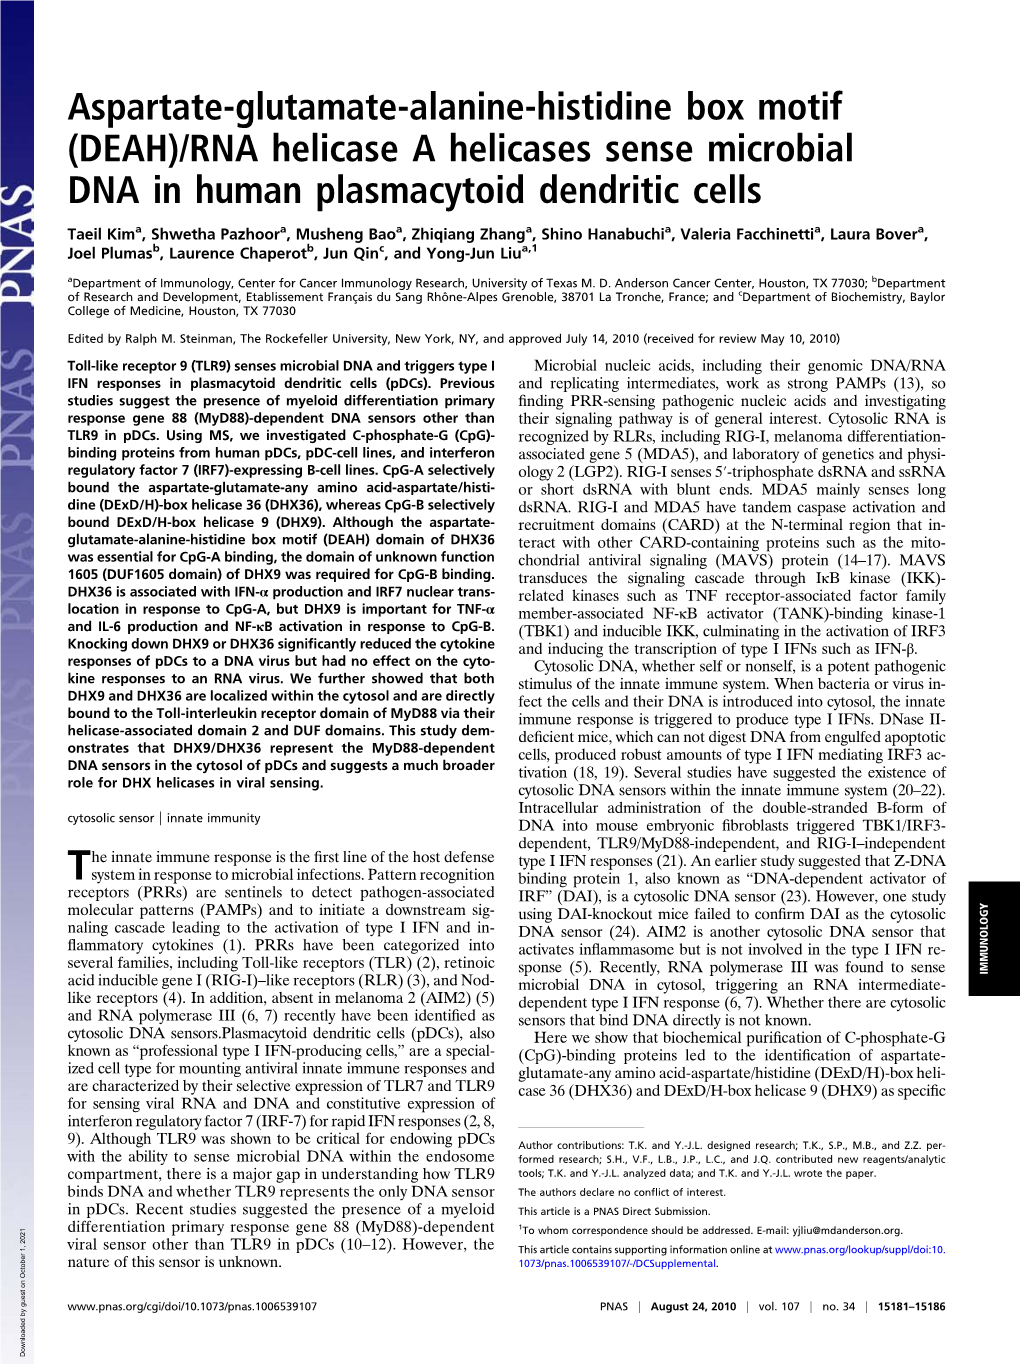 DEAH)/RNA Helicase a Helicases Sense Microbial DNA in Human Plasmacytoid Dendritic Cells